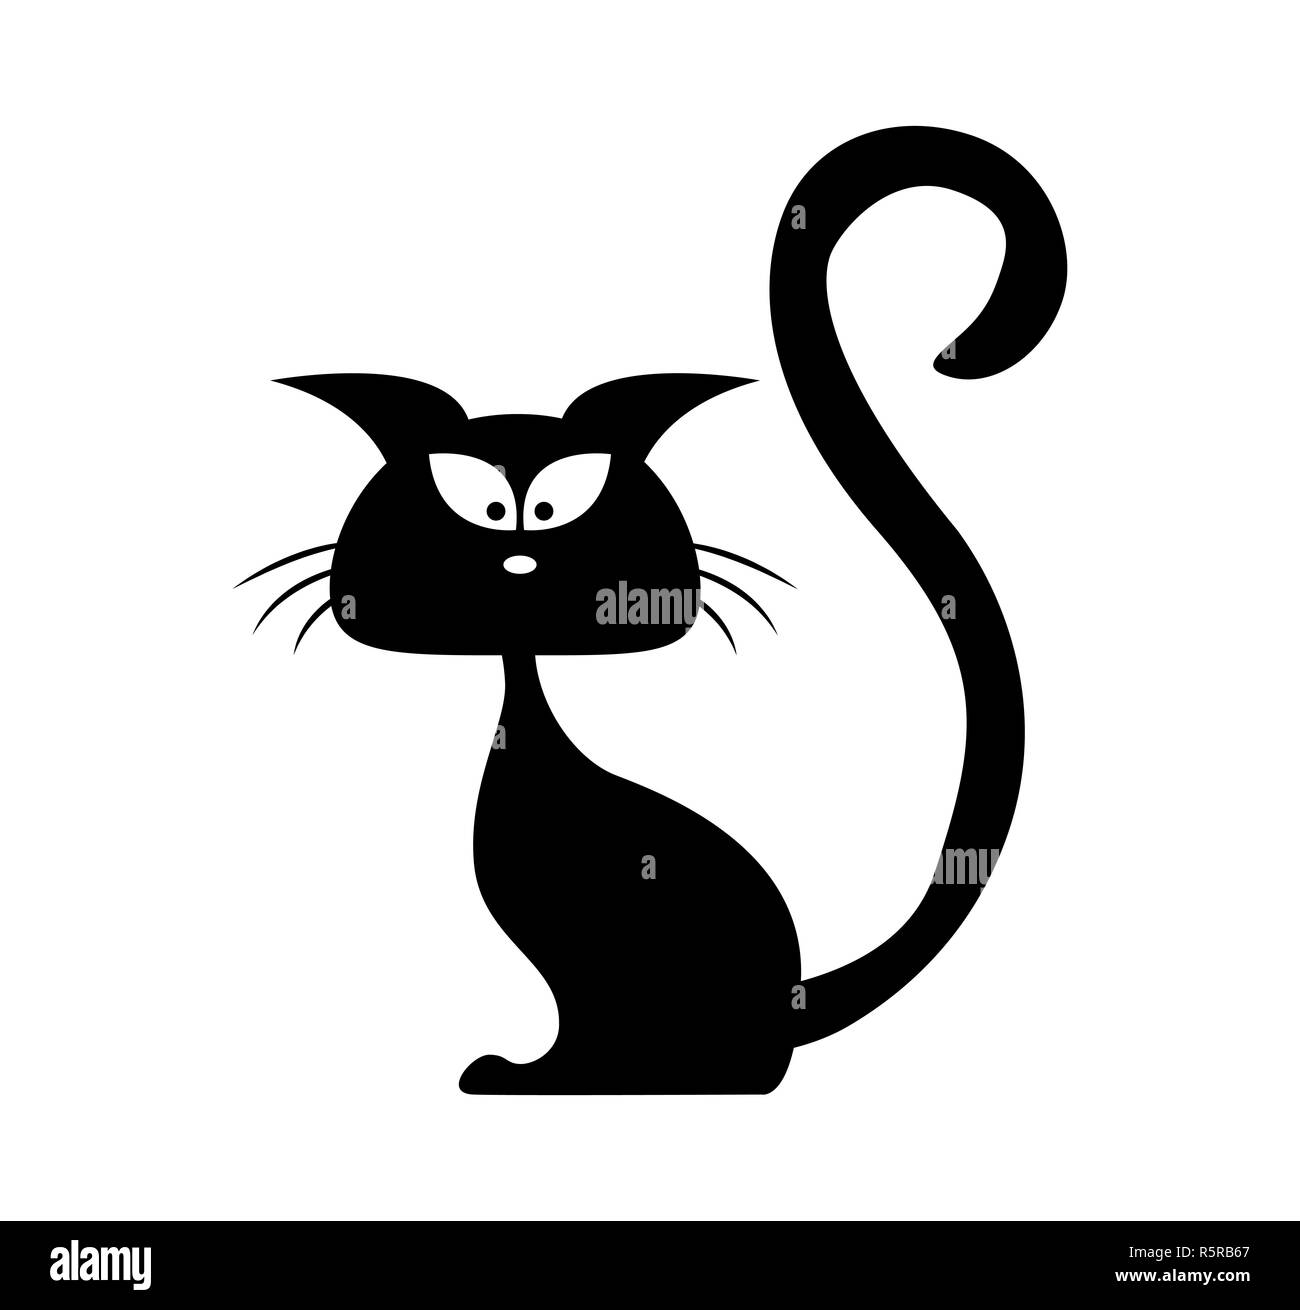 Halloween Black Cat Vector Silhouette Cartoon Clipart Illustration Isolated On White Background Stock Photo Alamy